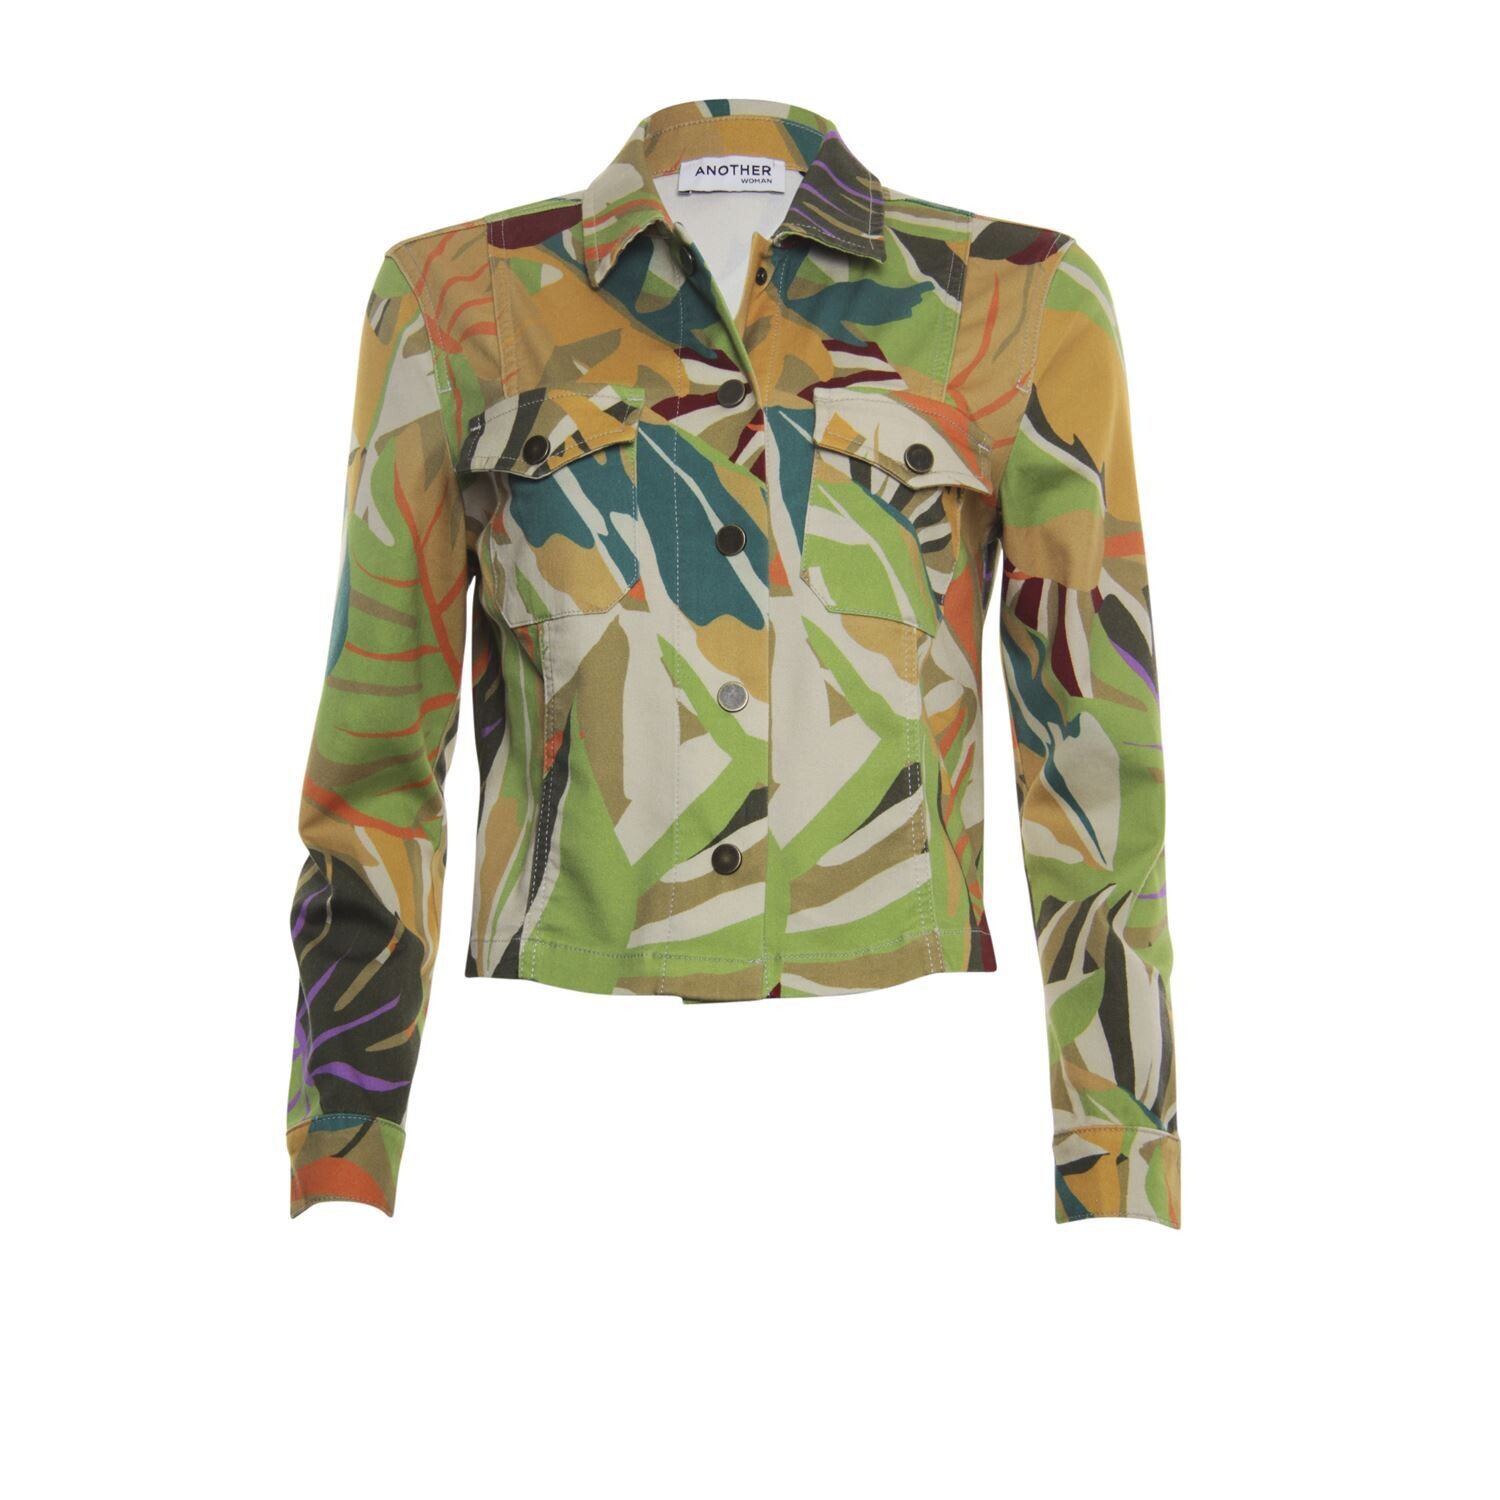 Another Woman jacket leaf print, Size: 36